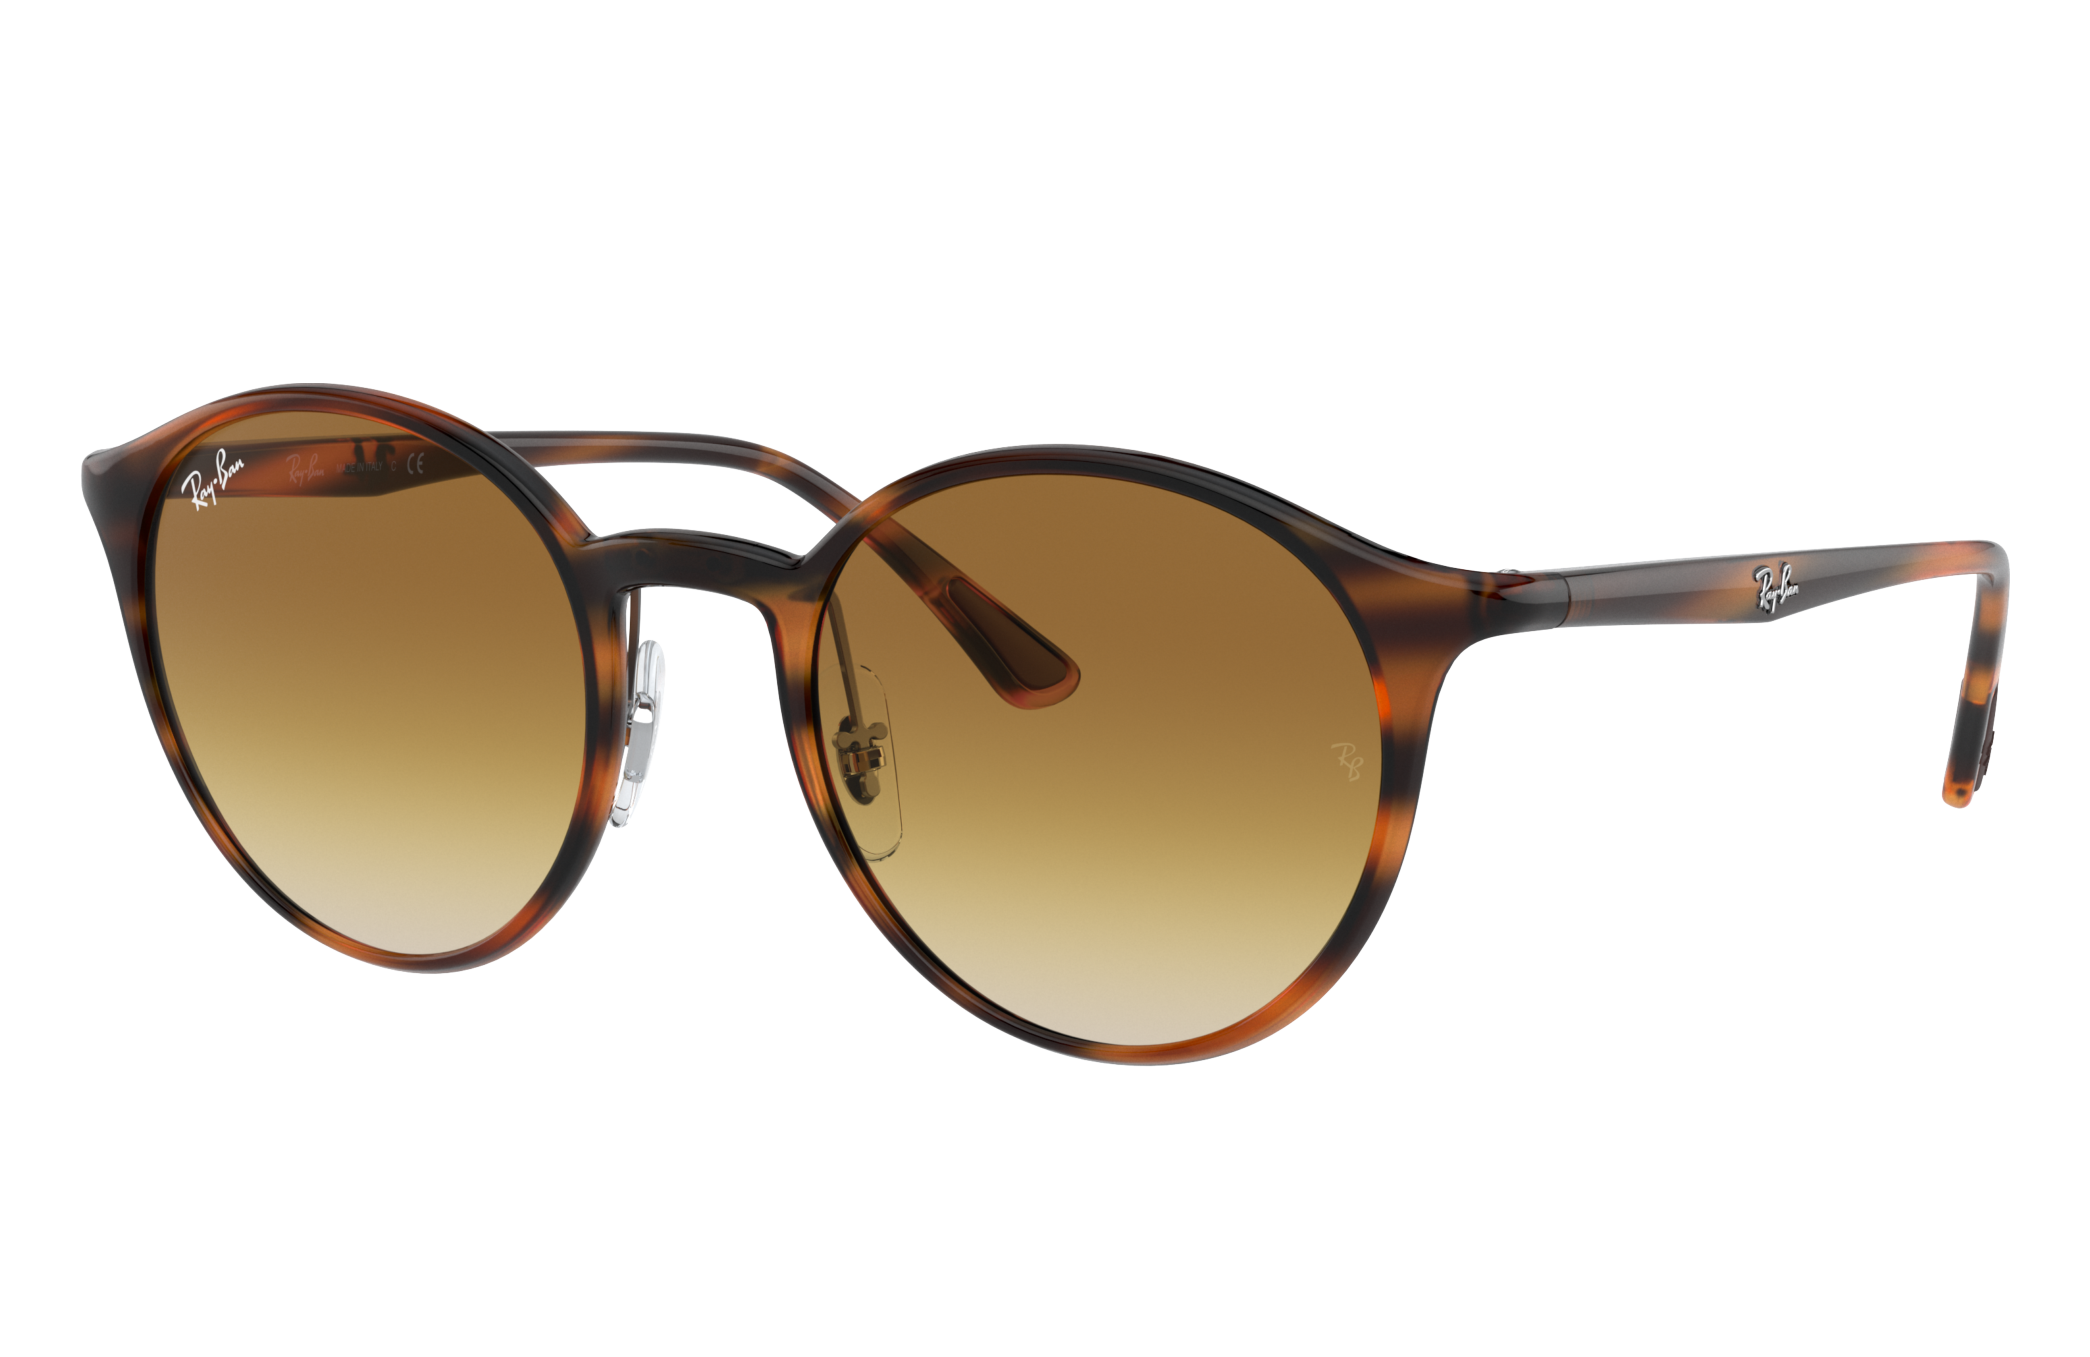 Rb4336 Sunglasses in Tortoise and Light Brown - RB4336 | Ray-Ban®